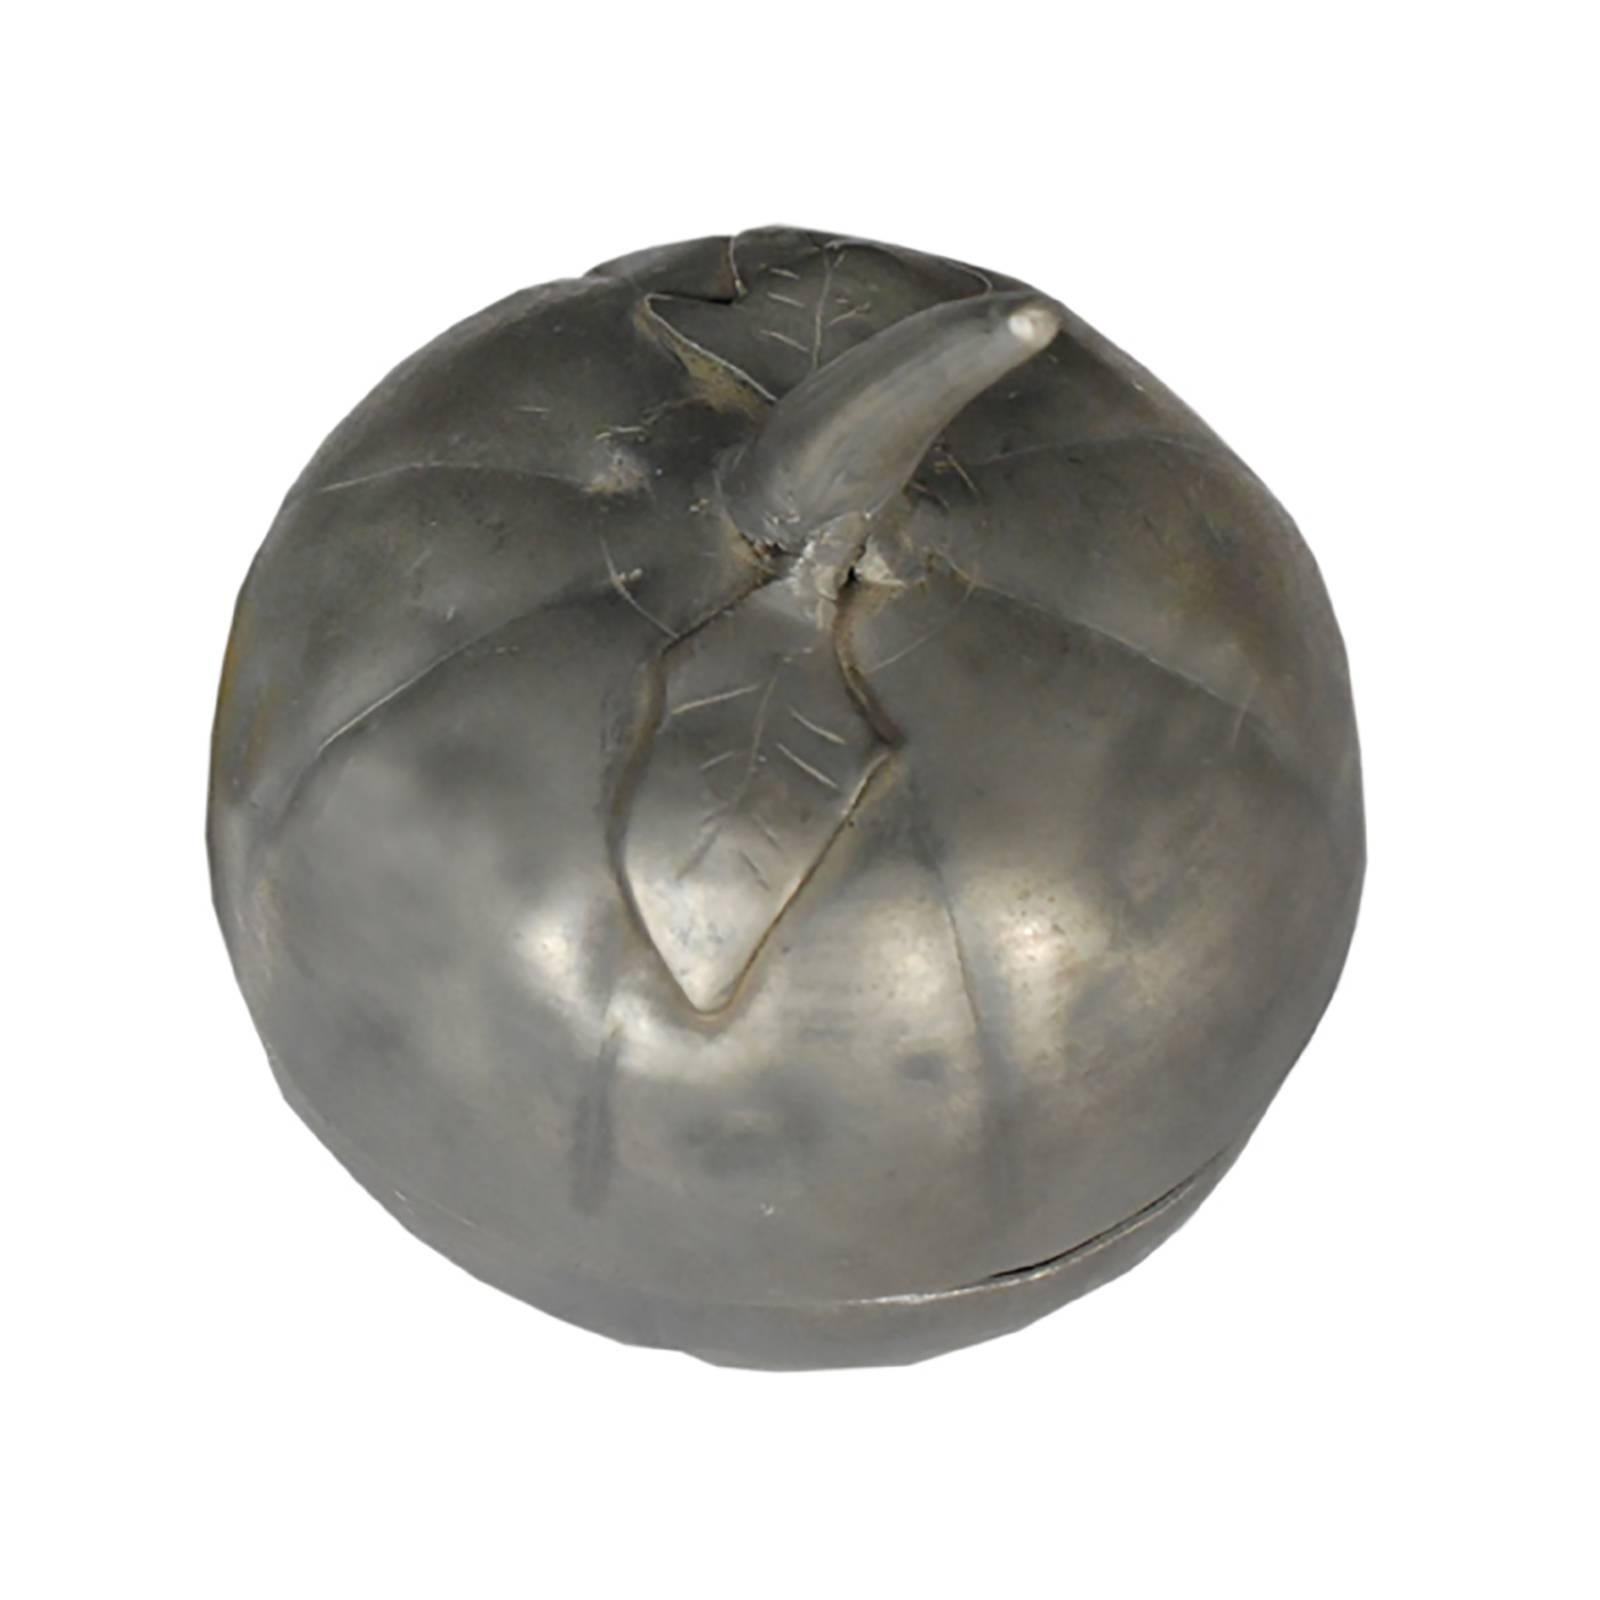 Qing Chinese Pewter Squash Container